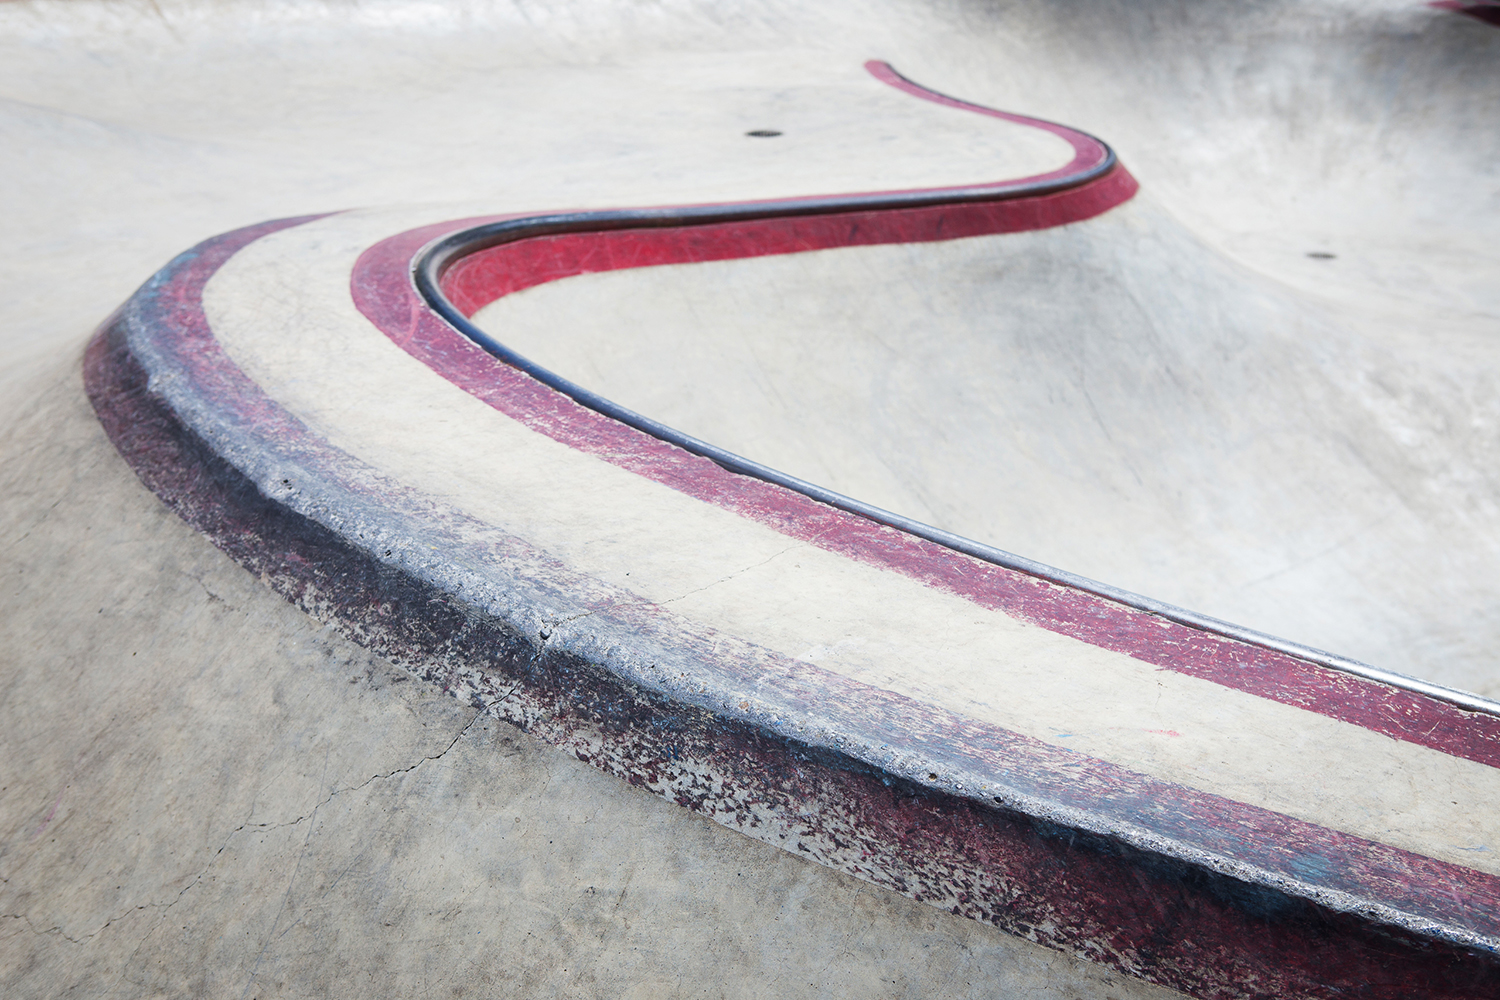  A close up look at the hard edge and coping section of the Alberta Skate Spot 